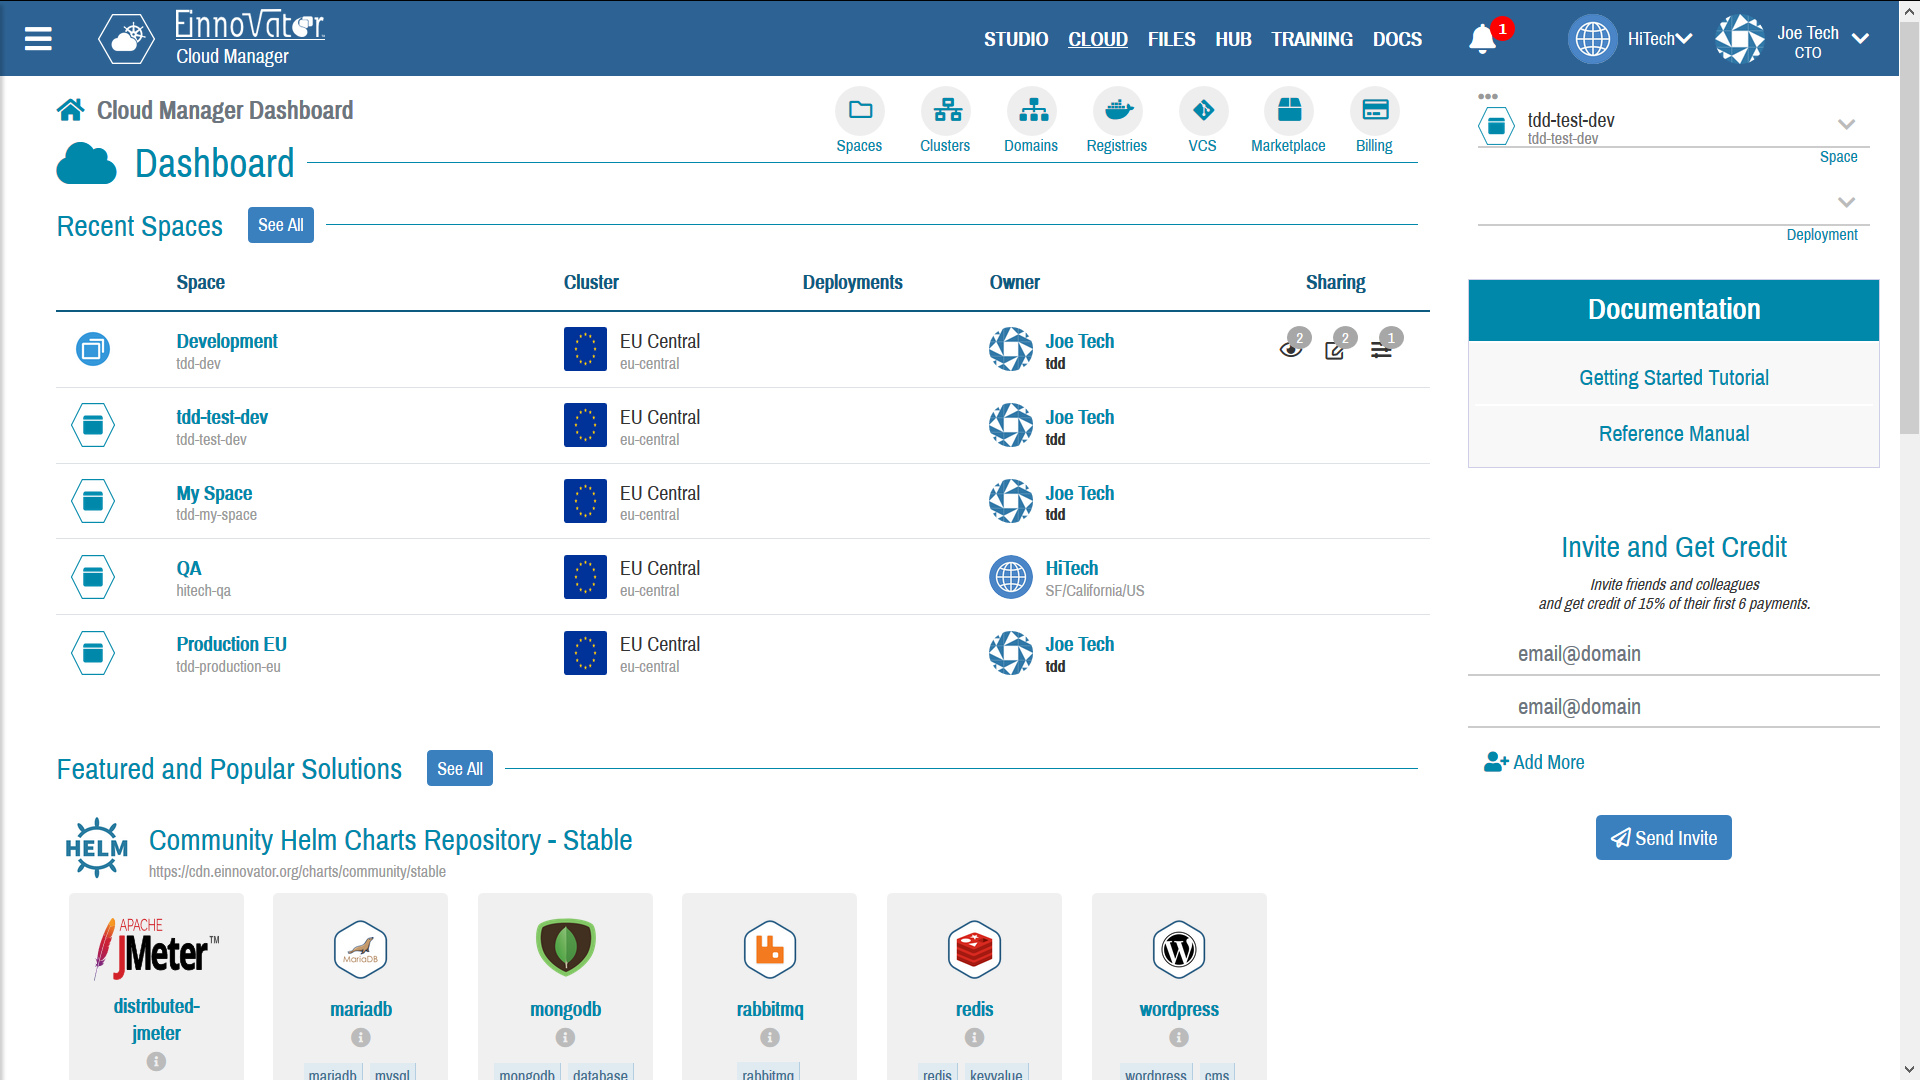 Cloud Manager Dashboard